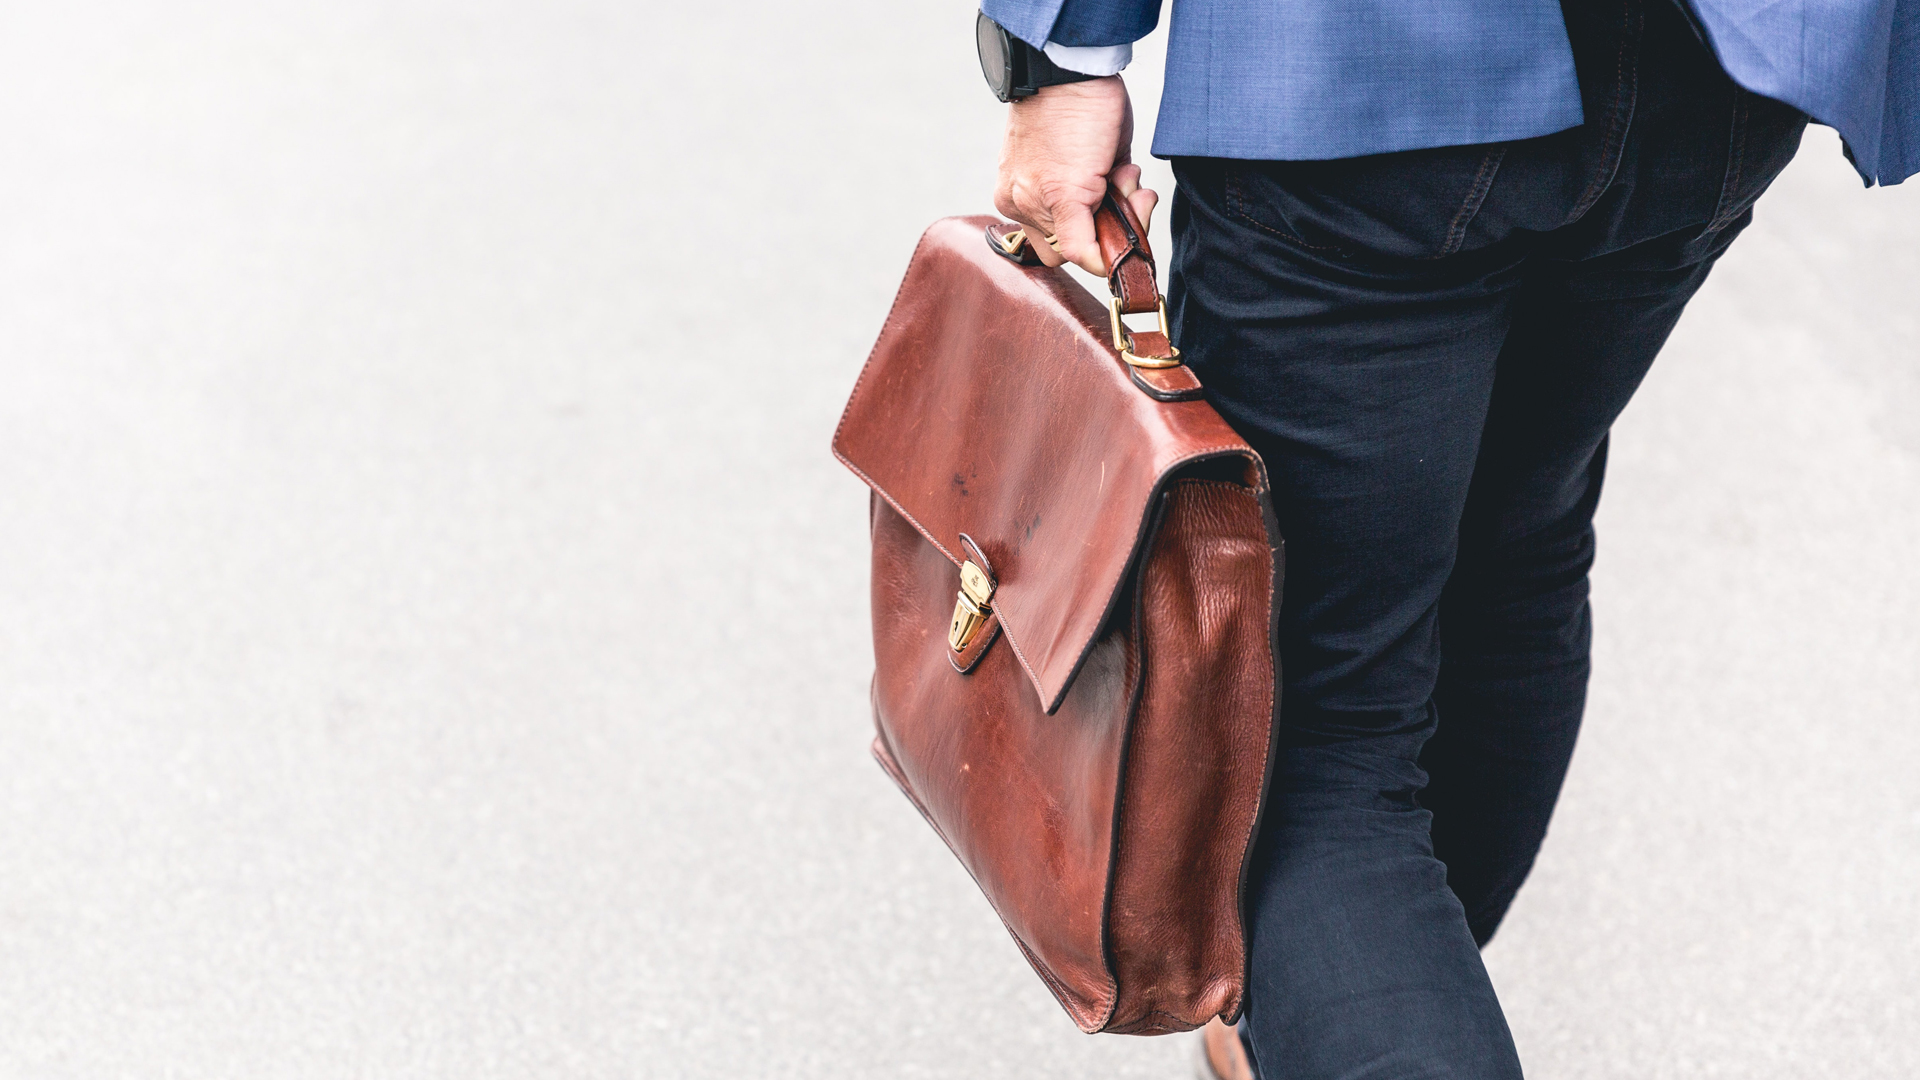 Close up of man walking with a briefcase